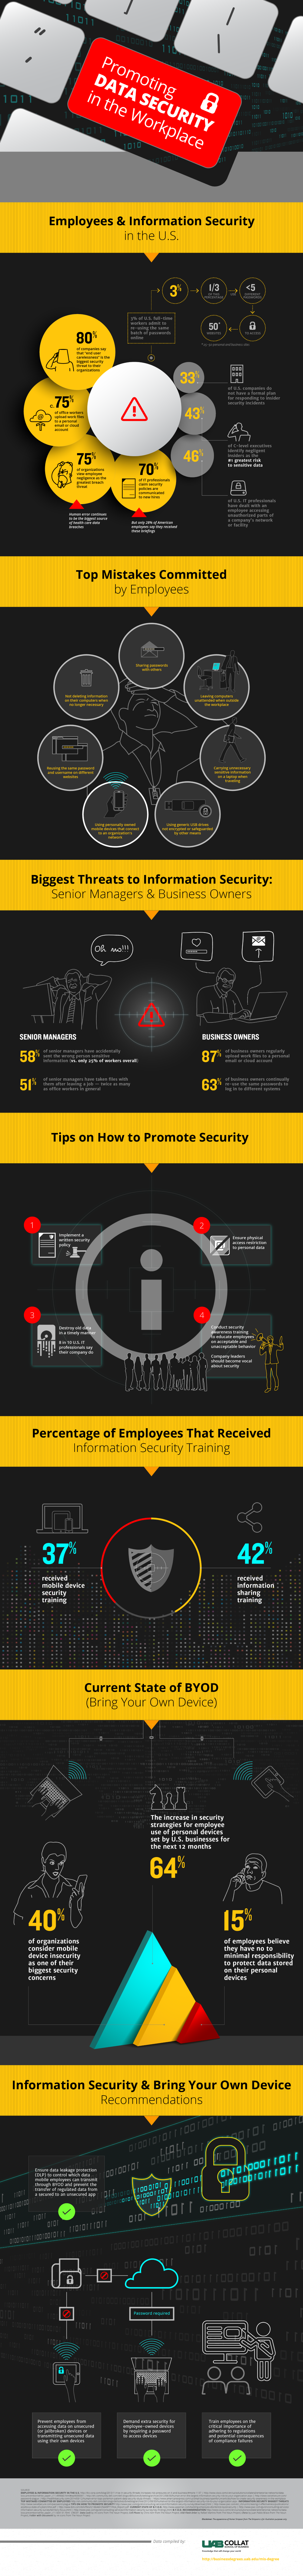 Promoting Data Security in the Workplace